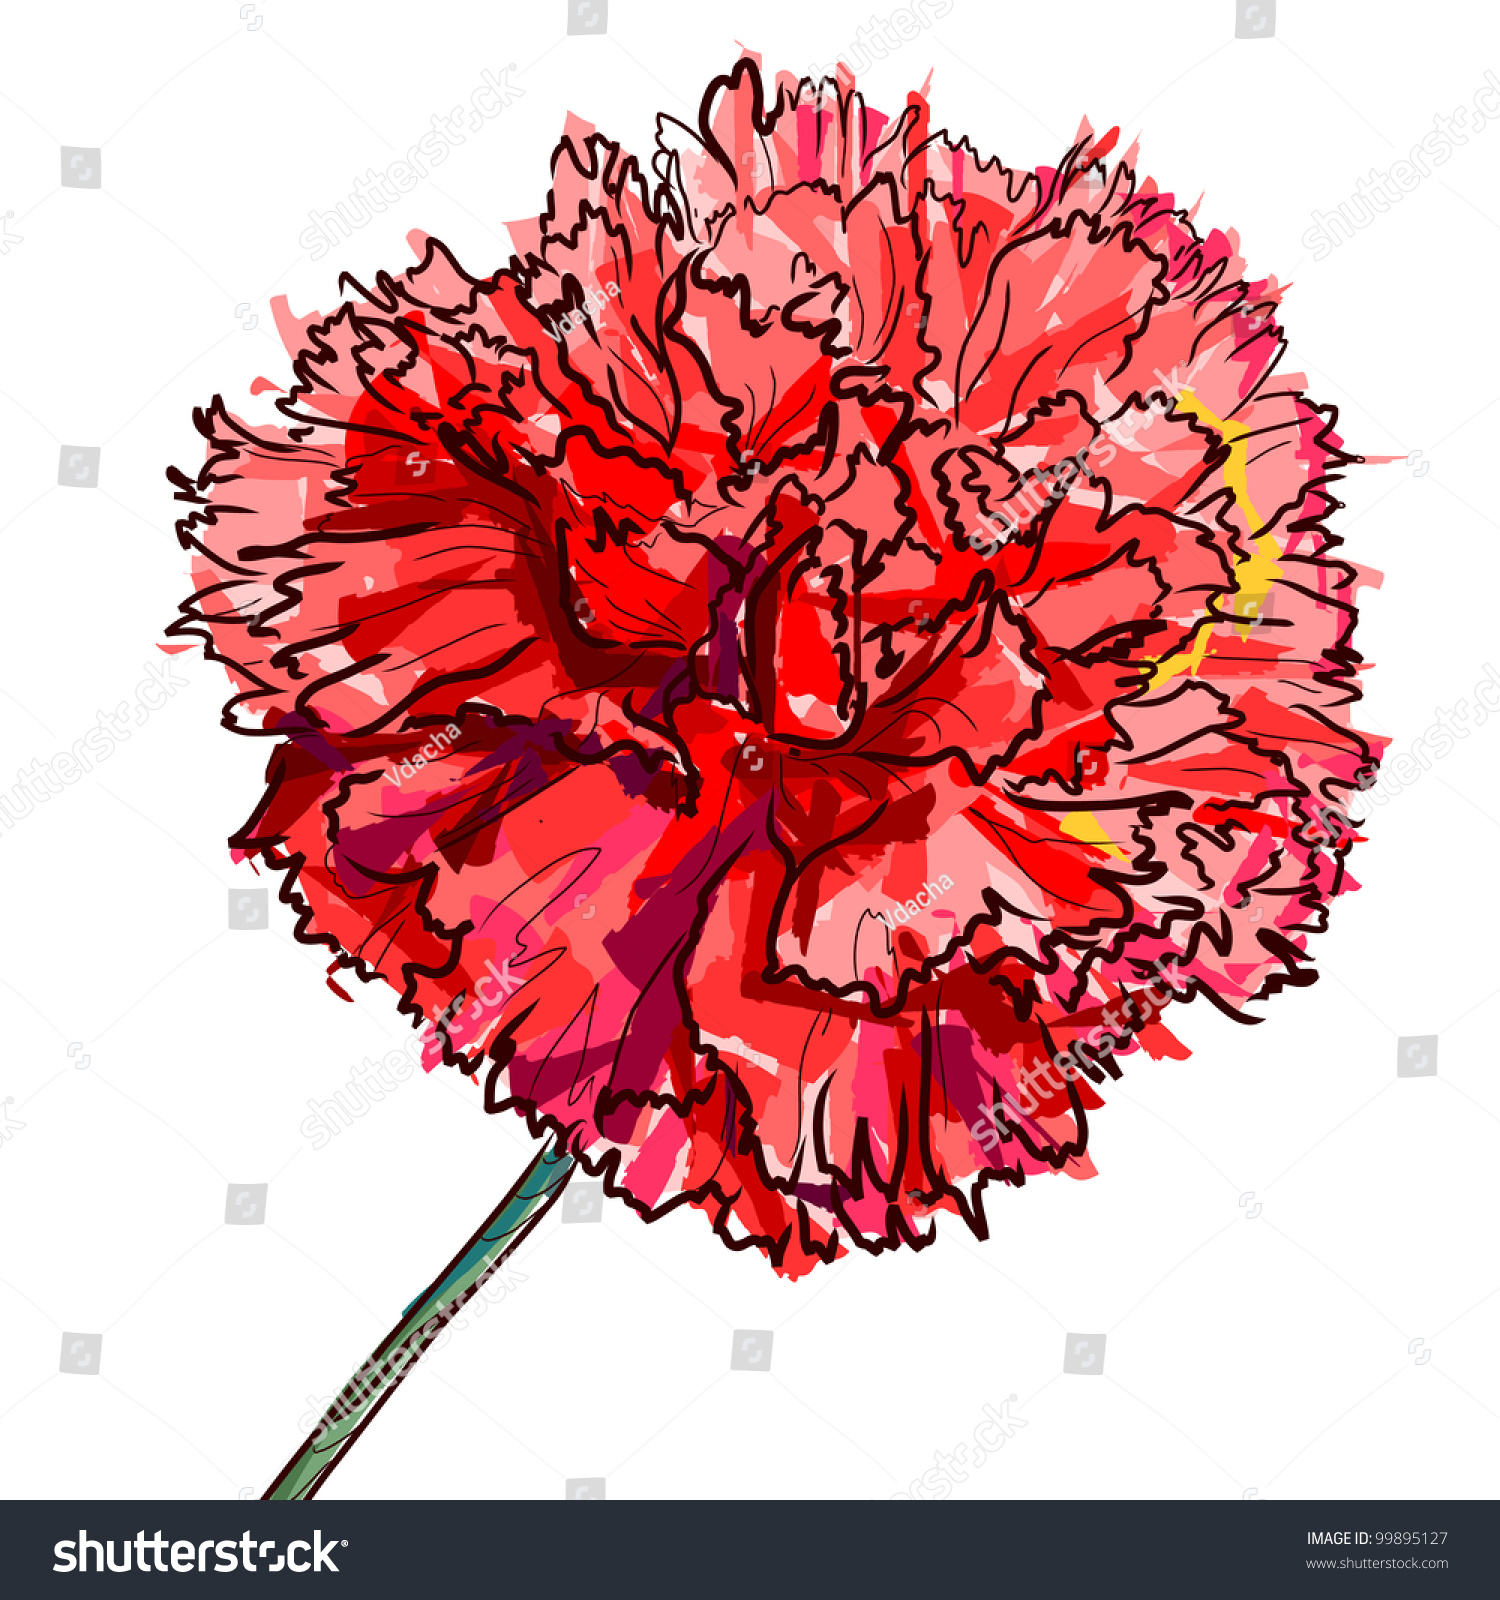 Red Flower Of A Carnation Isolated On A White Background Stock Vector